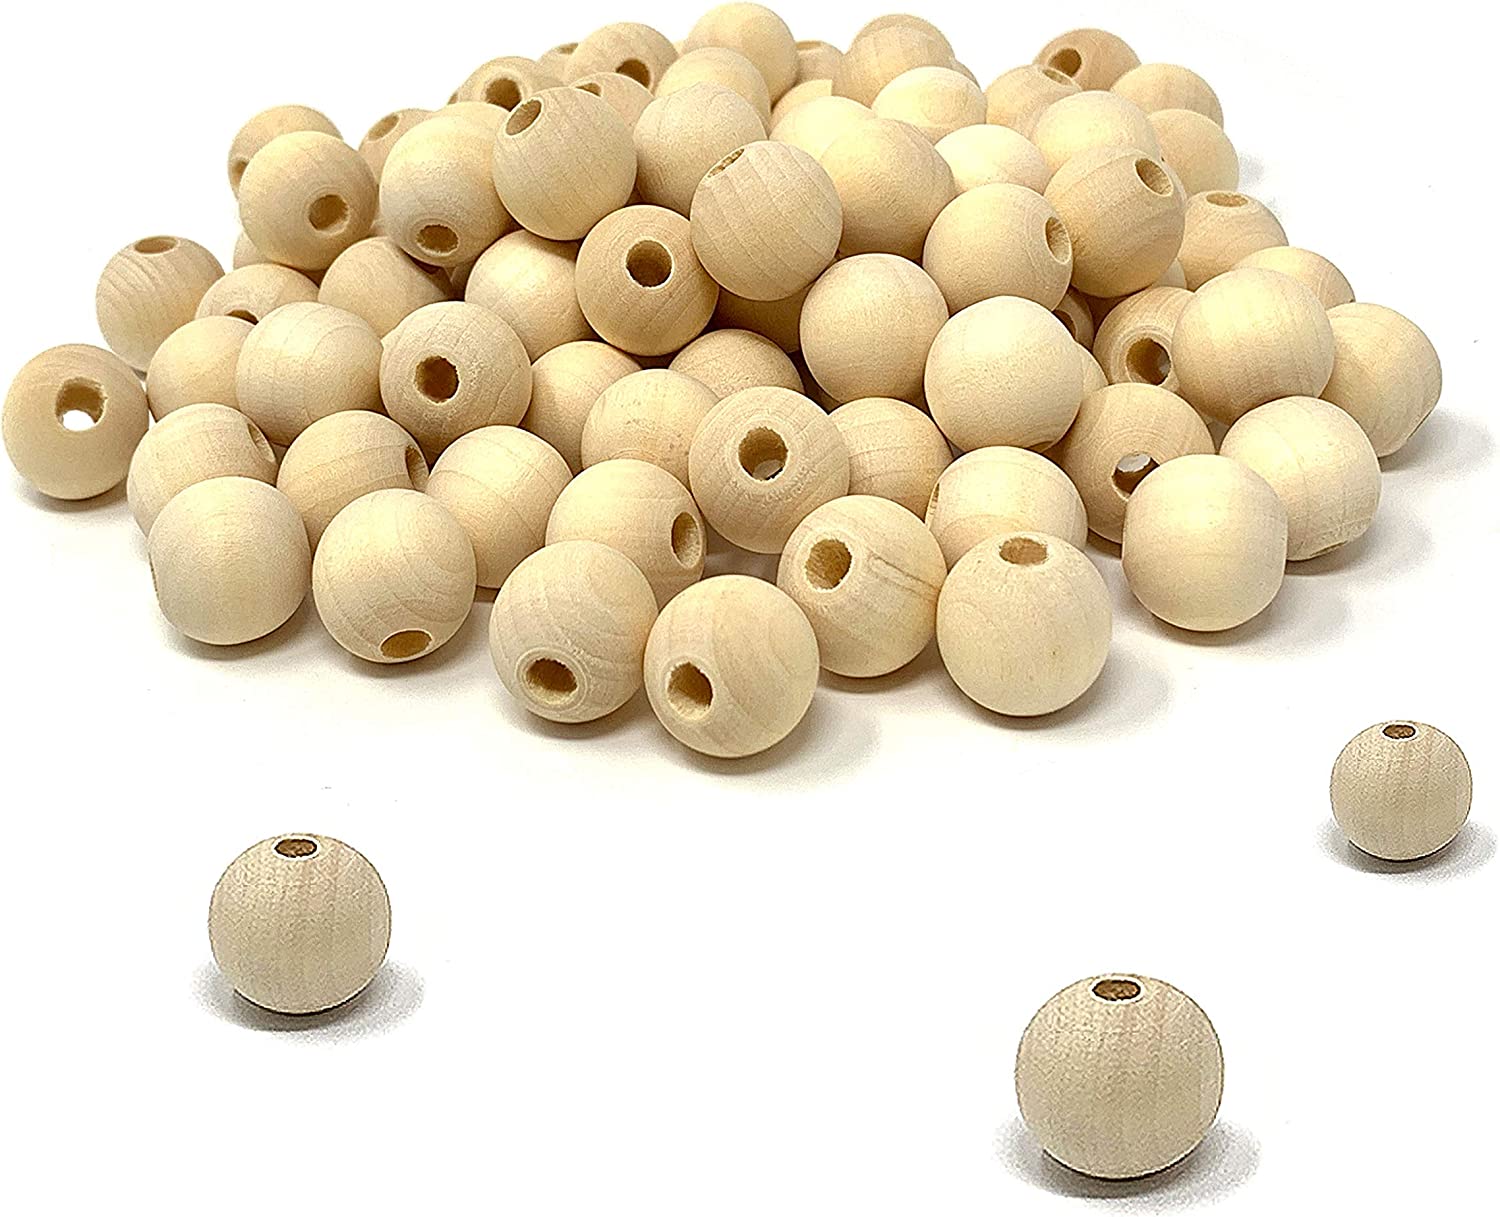  200PCS Craft Wooden Beads(15 mm) - Natural Unfinished Wood  Beads - Half Wooden Beads for Crafts, Painting Woodworking - Decorative  Christmas Wooden Beads, Split Wood Balls for Arts DIY Projects